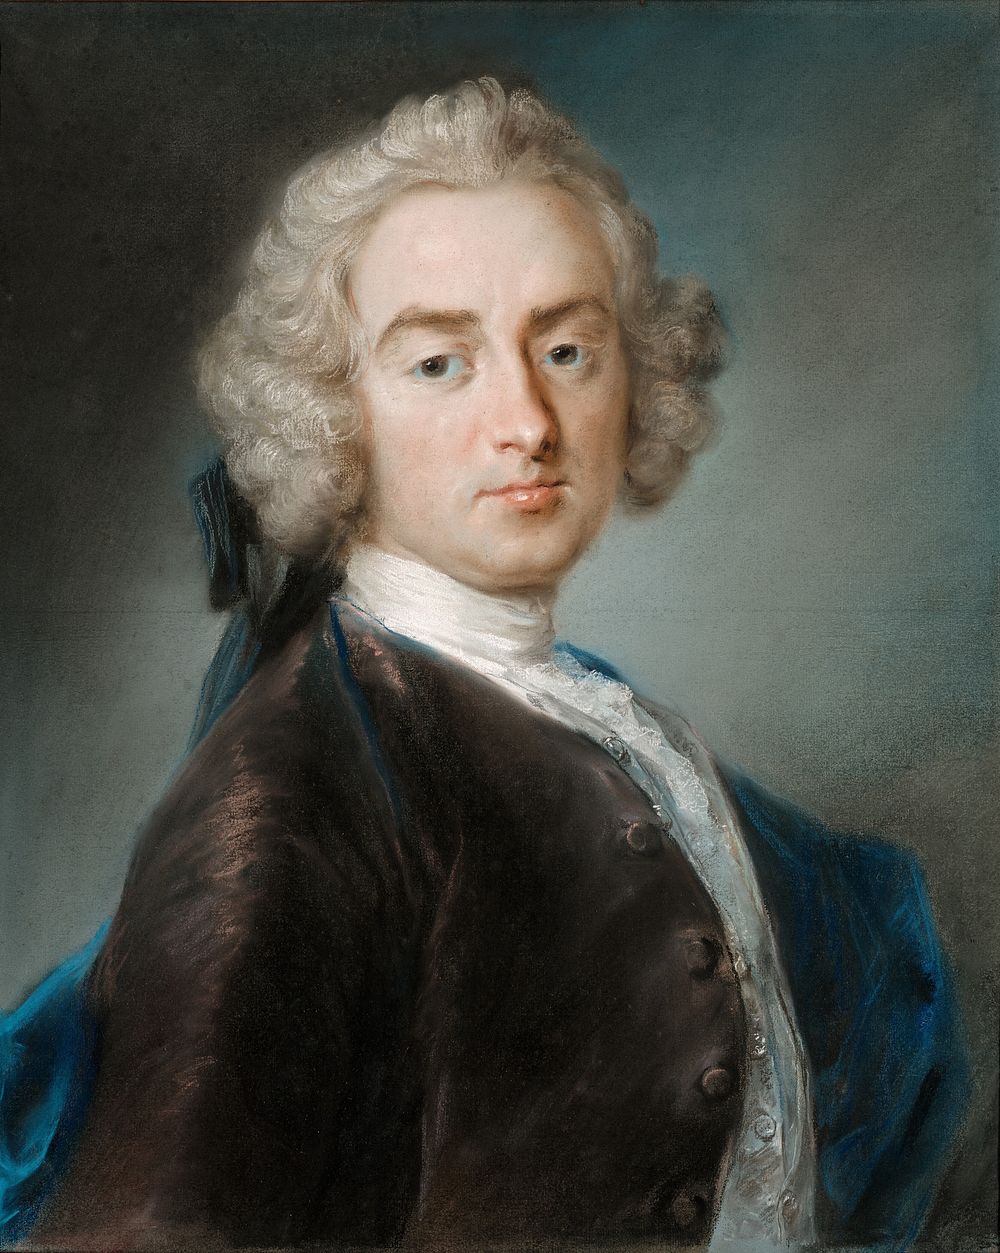 Sir James Gray, 2nd Bt. by Rosalba Carriera